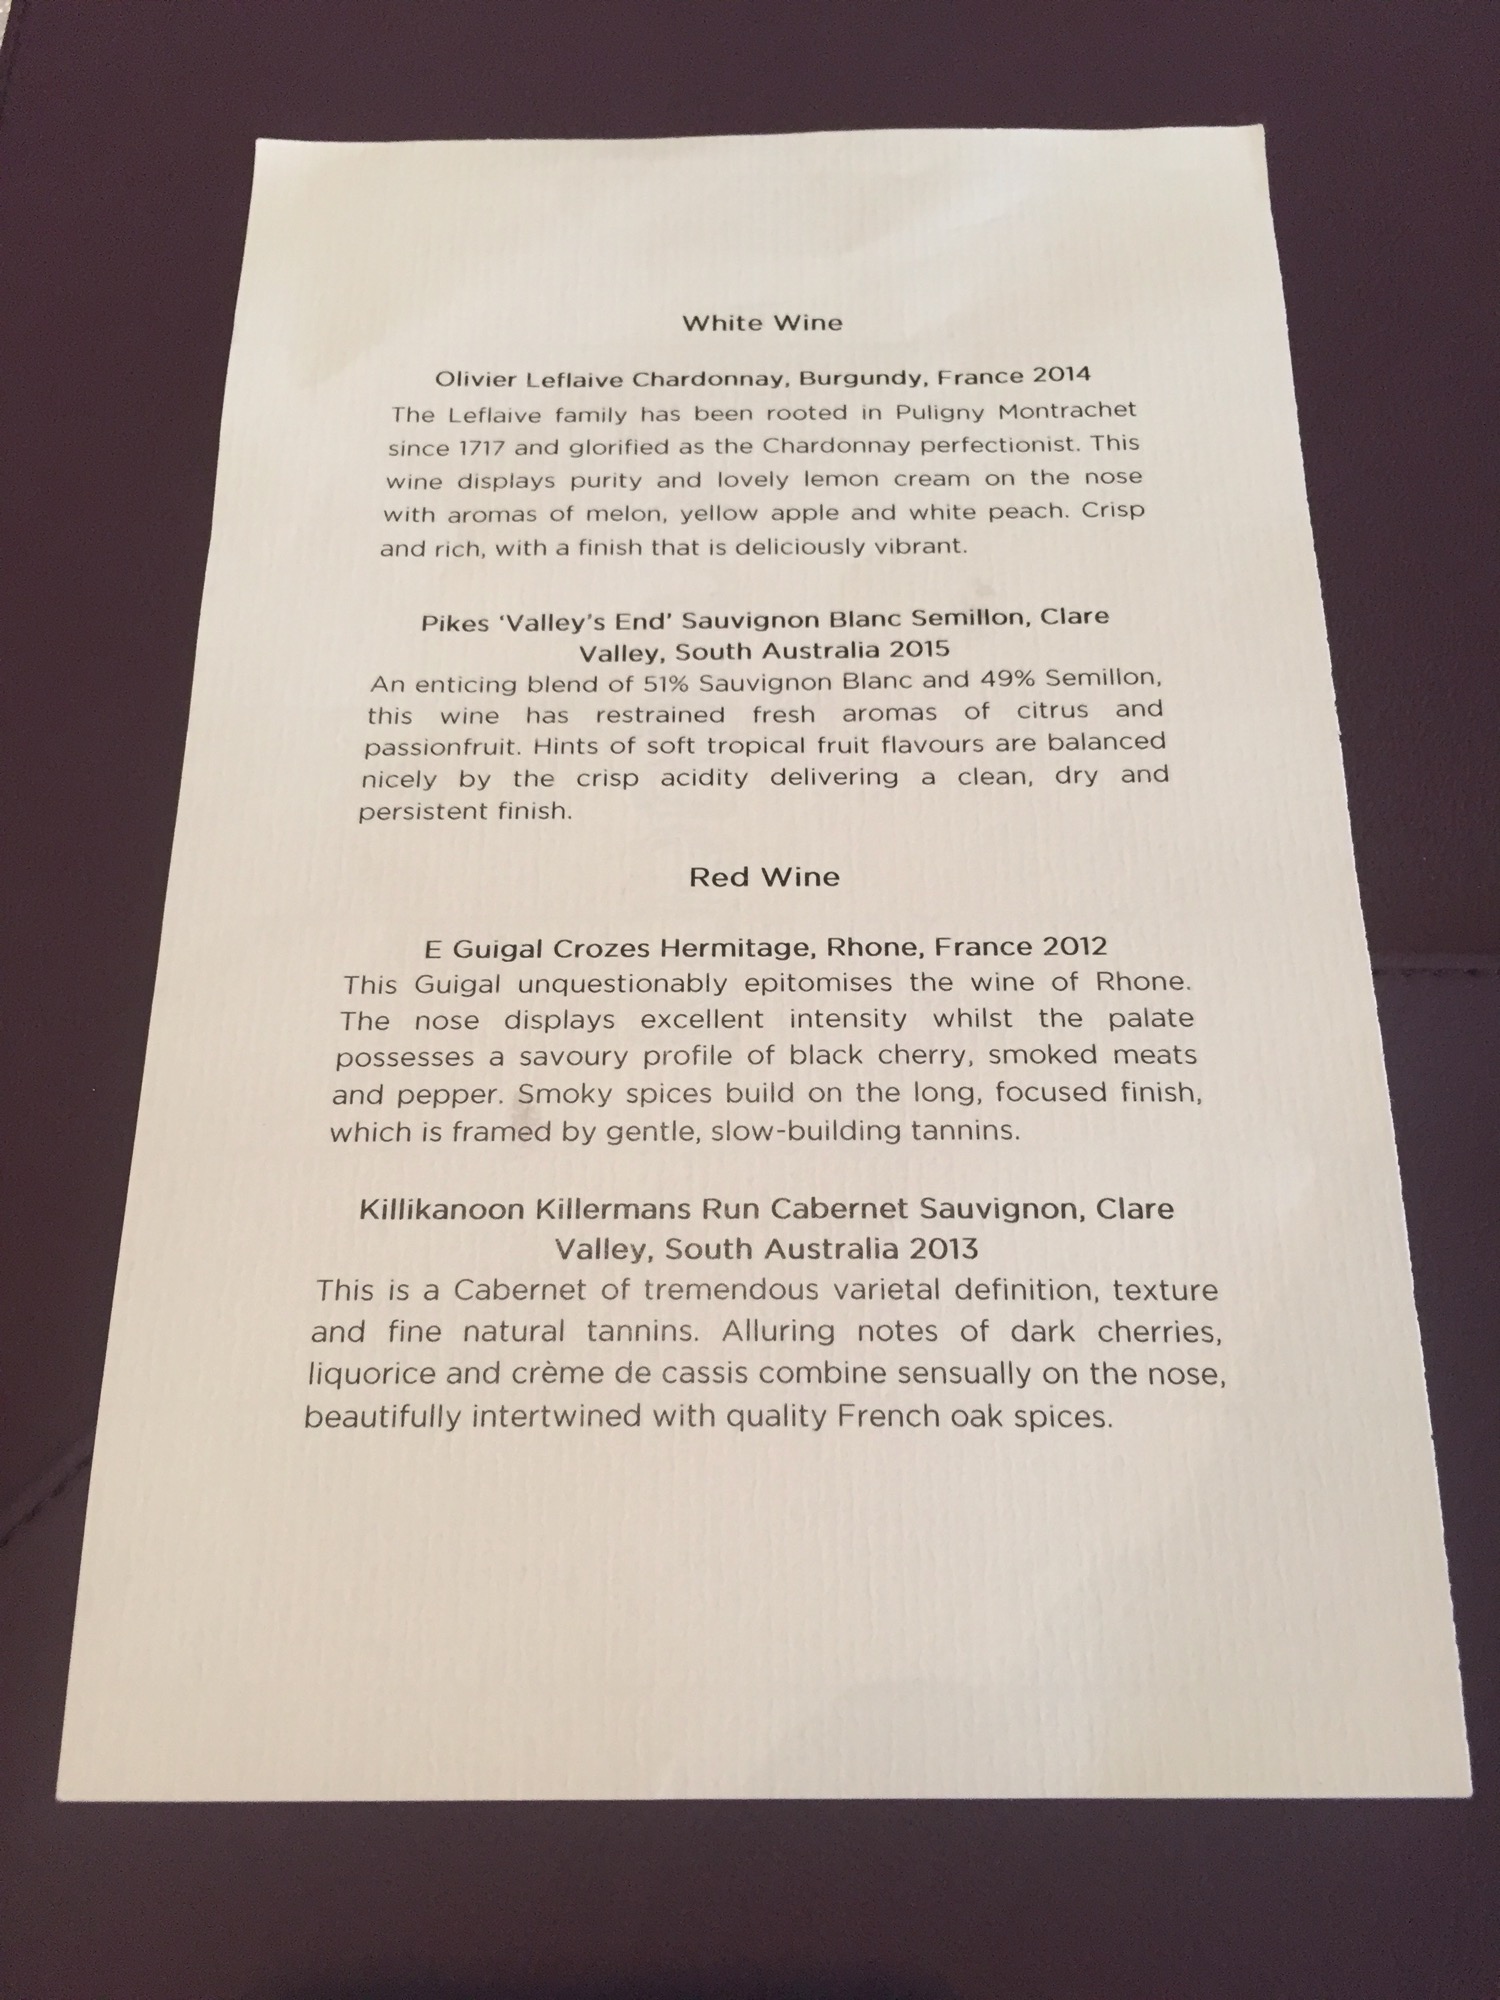 a white paper with black text